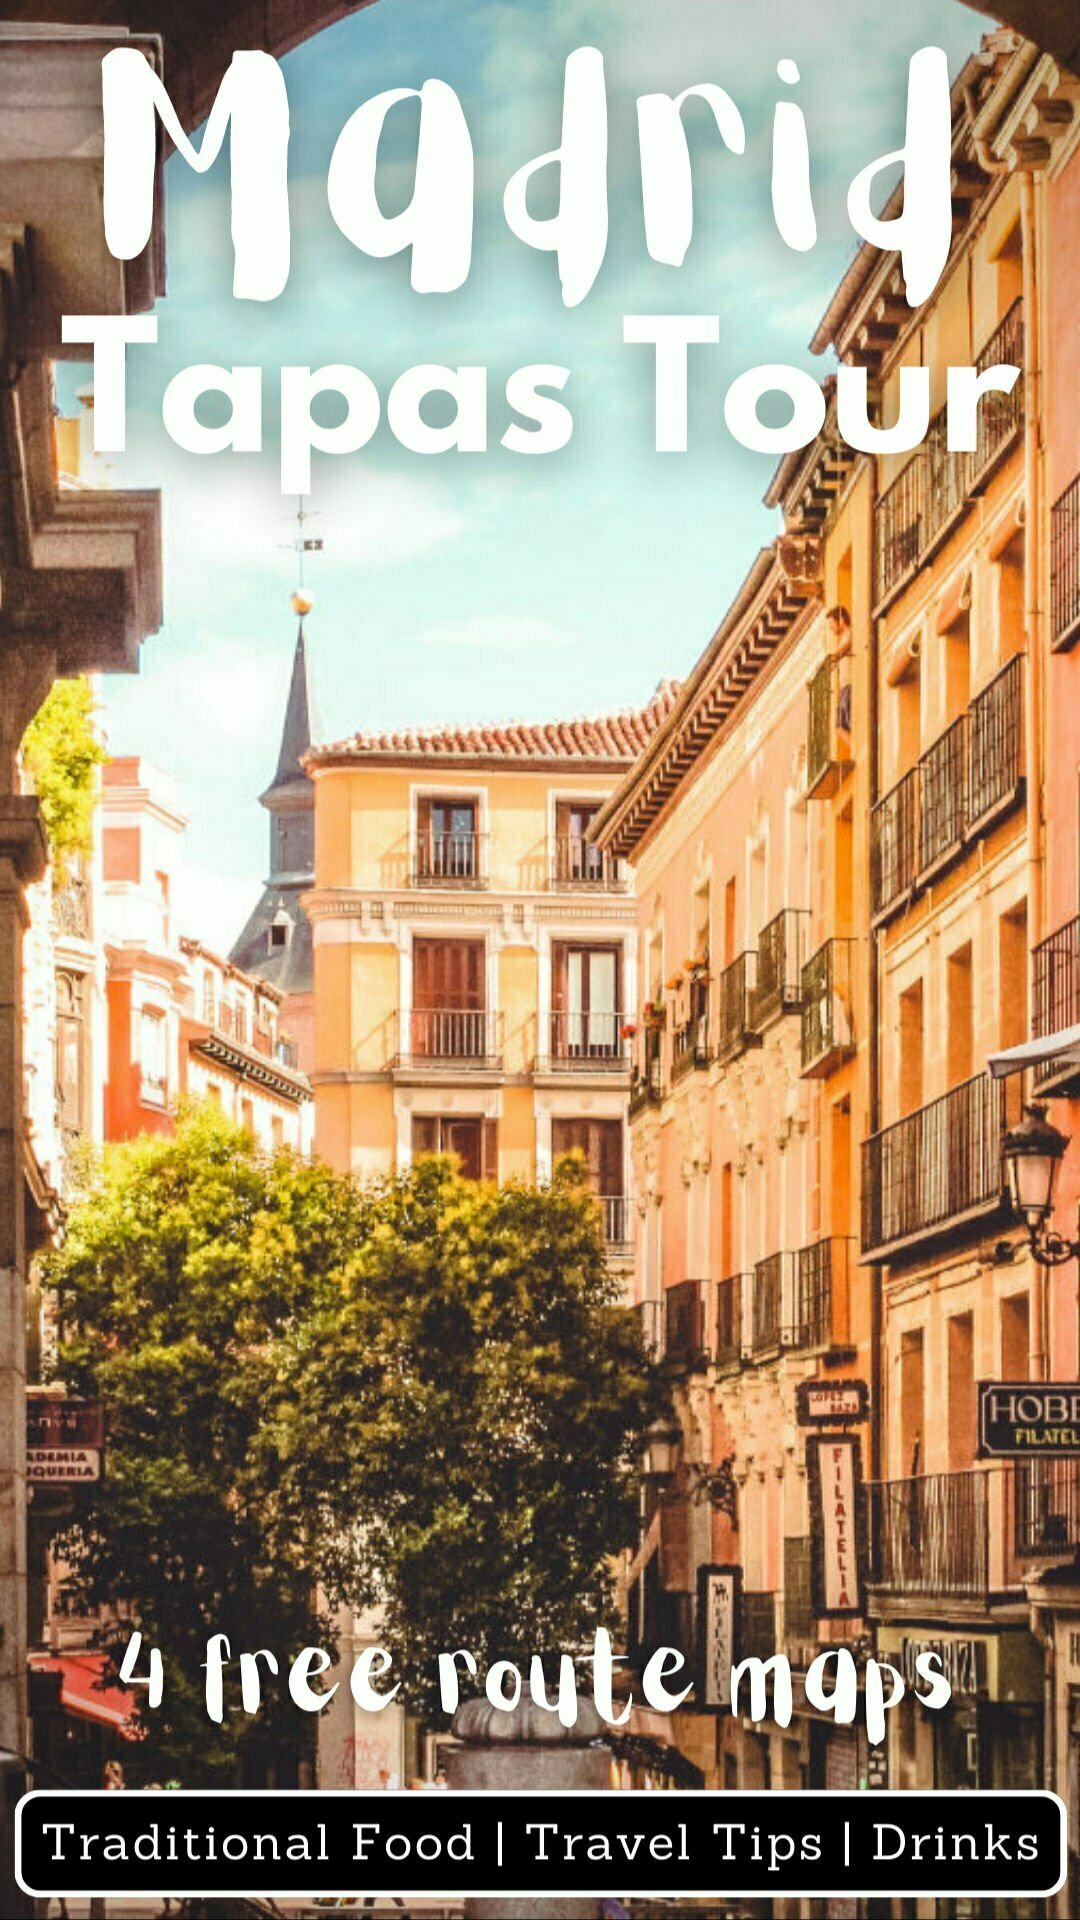 a bustelong street scene of Madrid city with. some pastel colored buildings and tapas bars